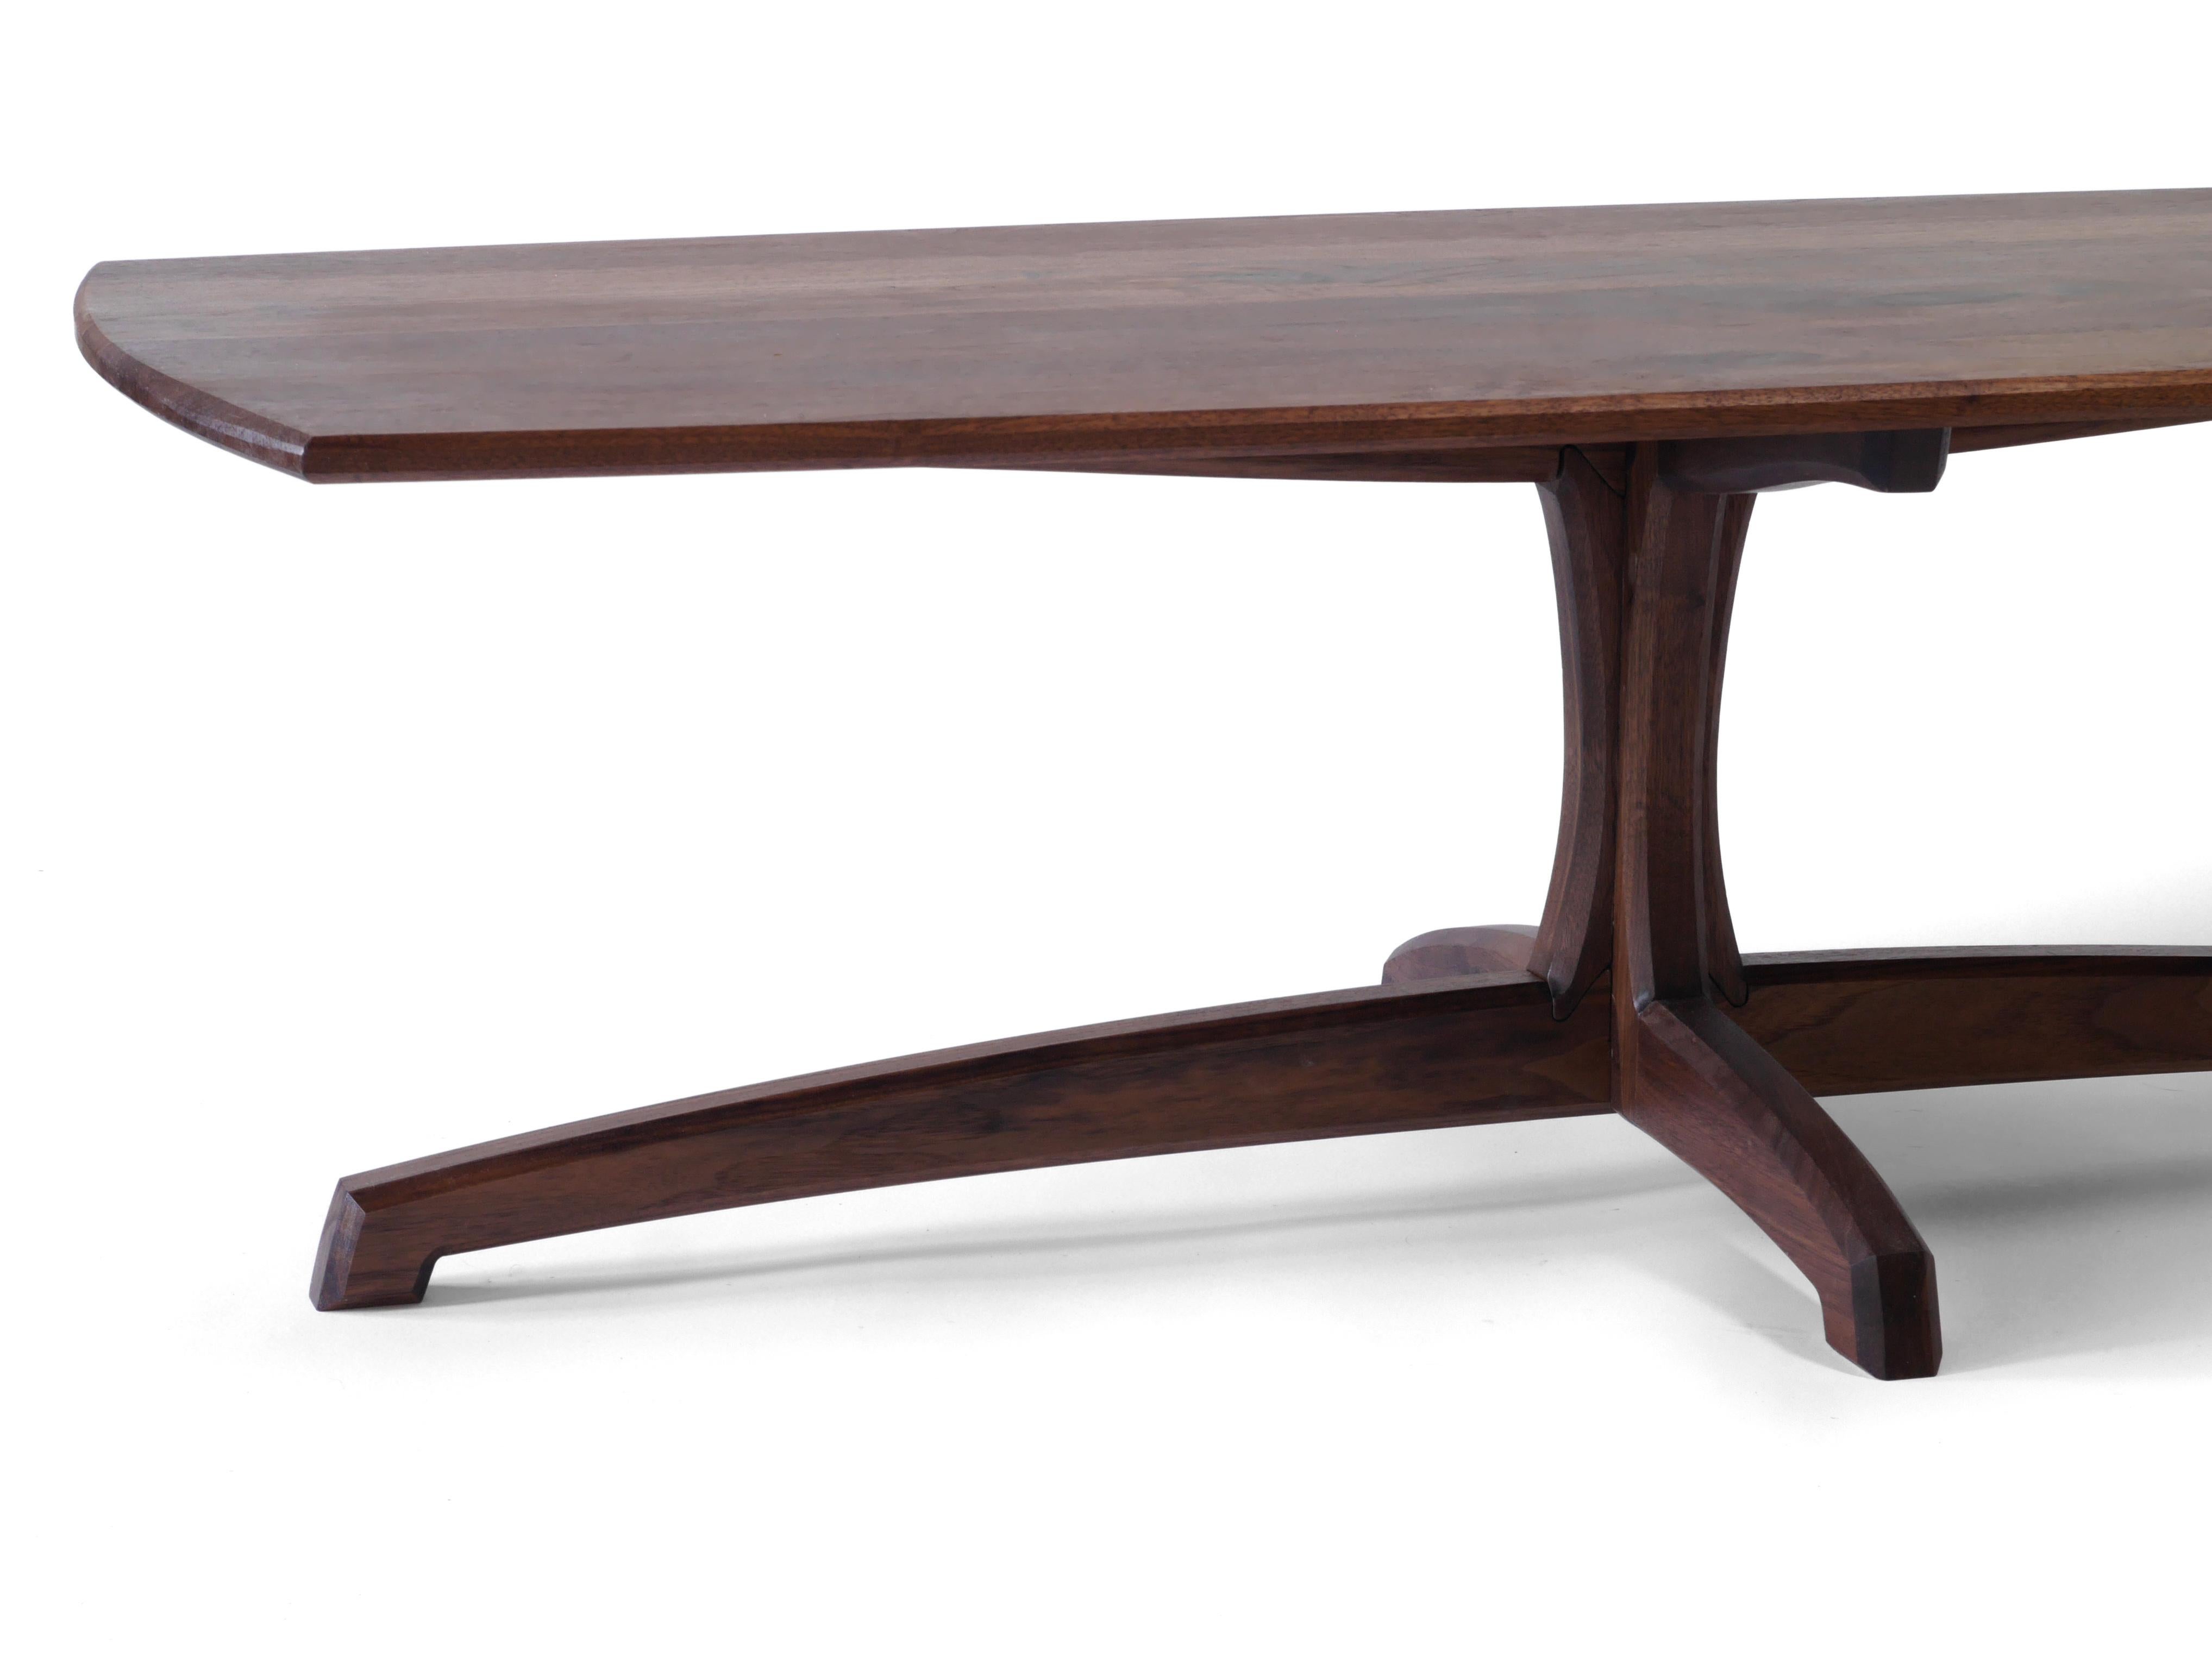 Joinery Walnut Plume Coffee Table, Contemporary Pedestal Living Room Table by Arid For Sale